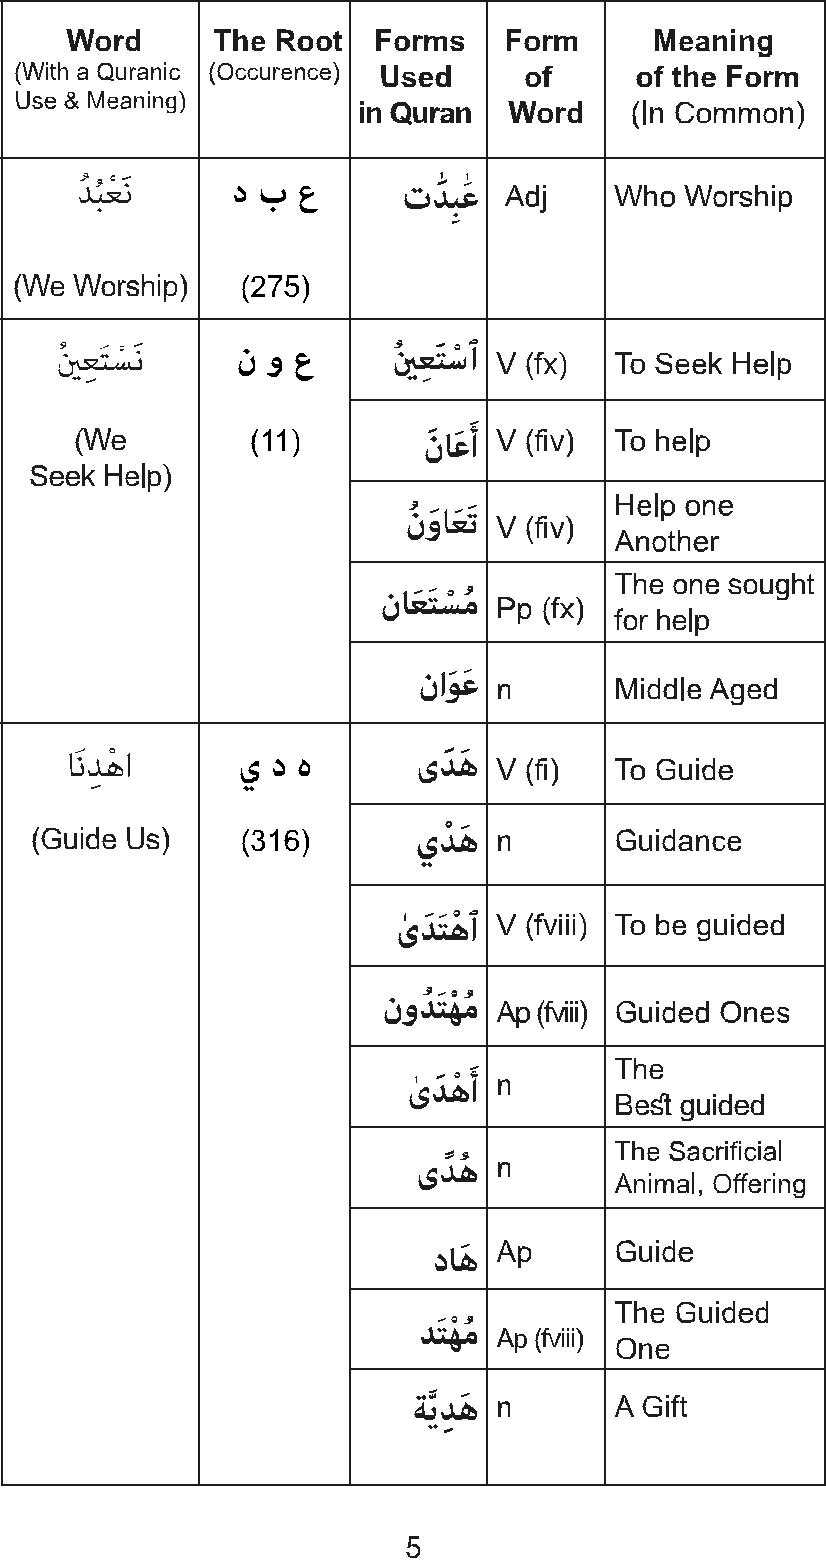 The Golden Words Dictionary of the Holy Quran - The Root Words and Their Forms - photo 7